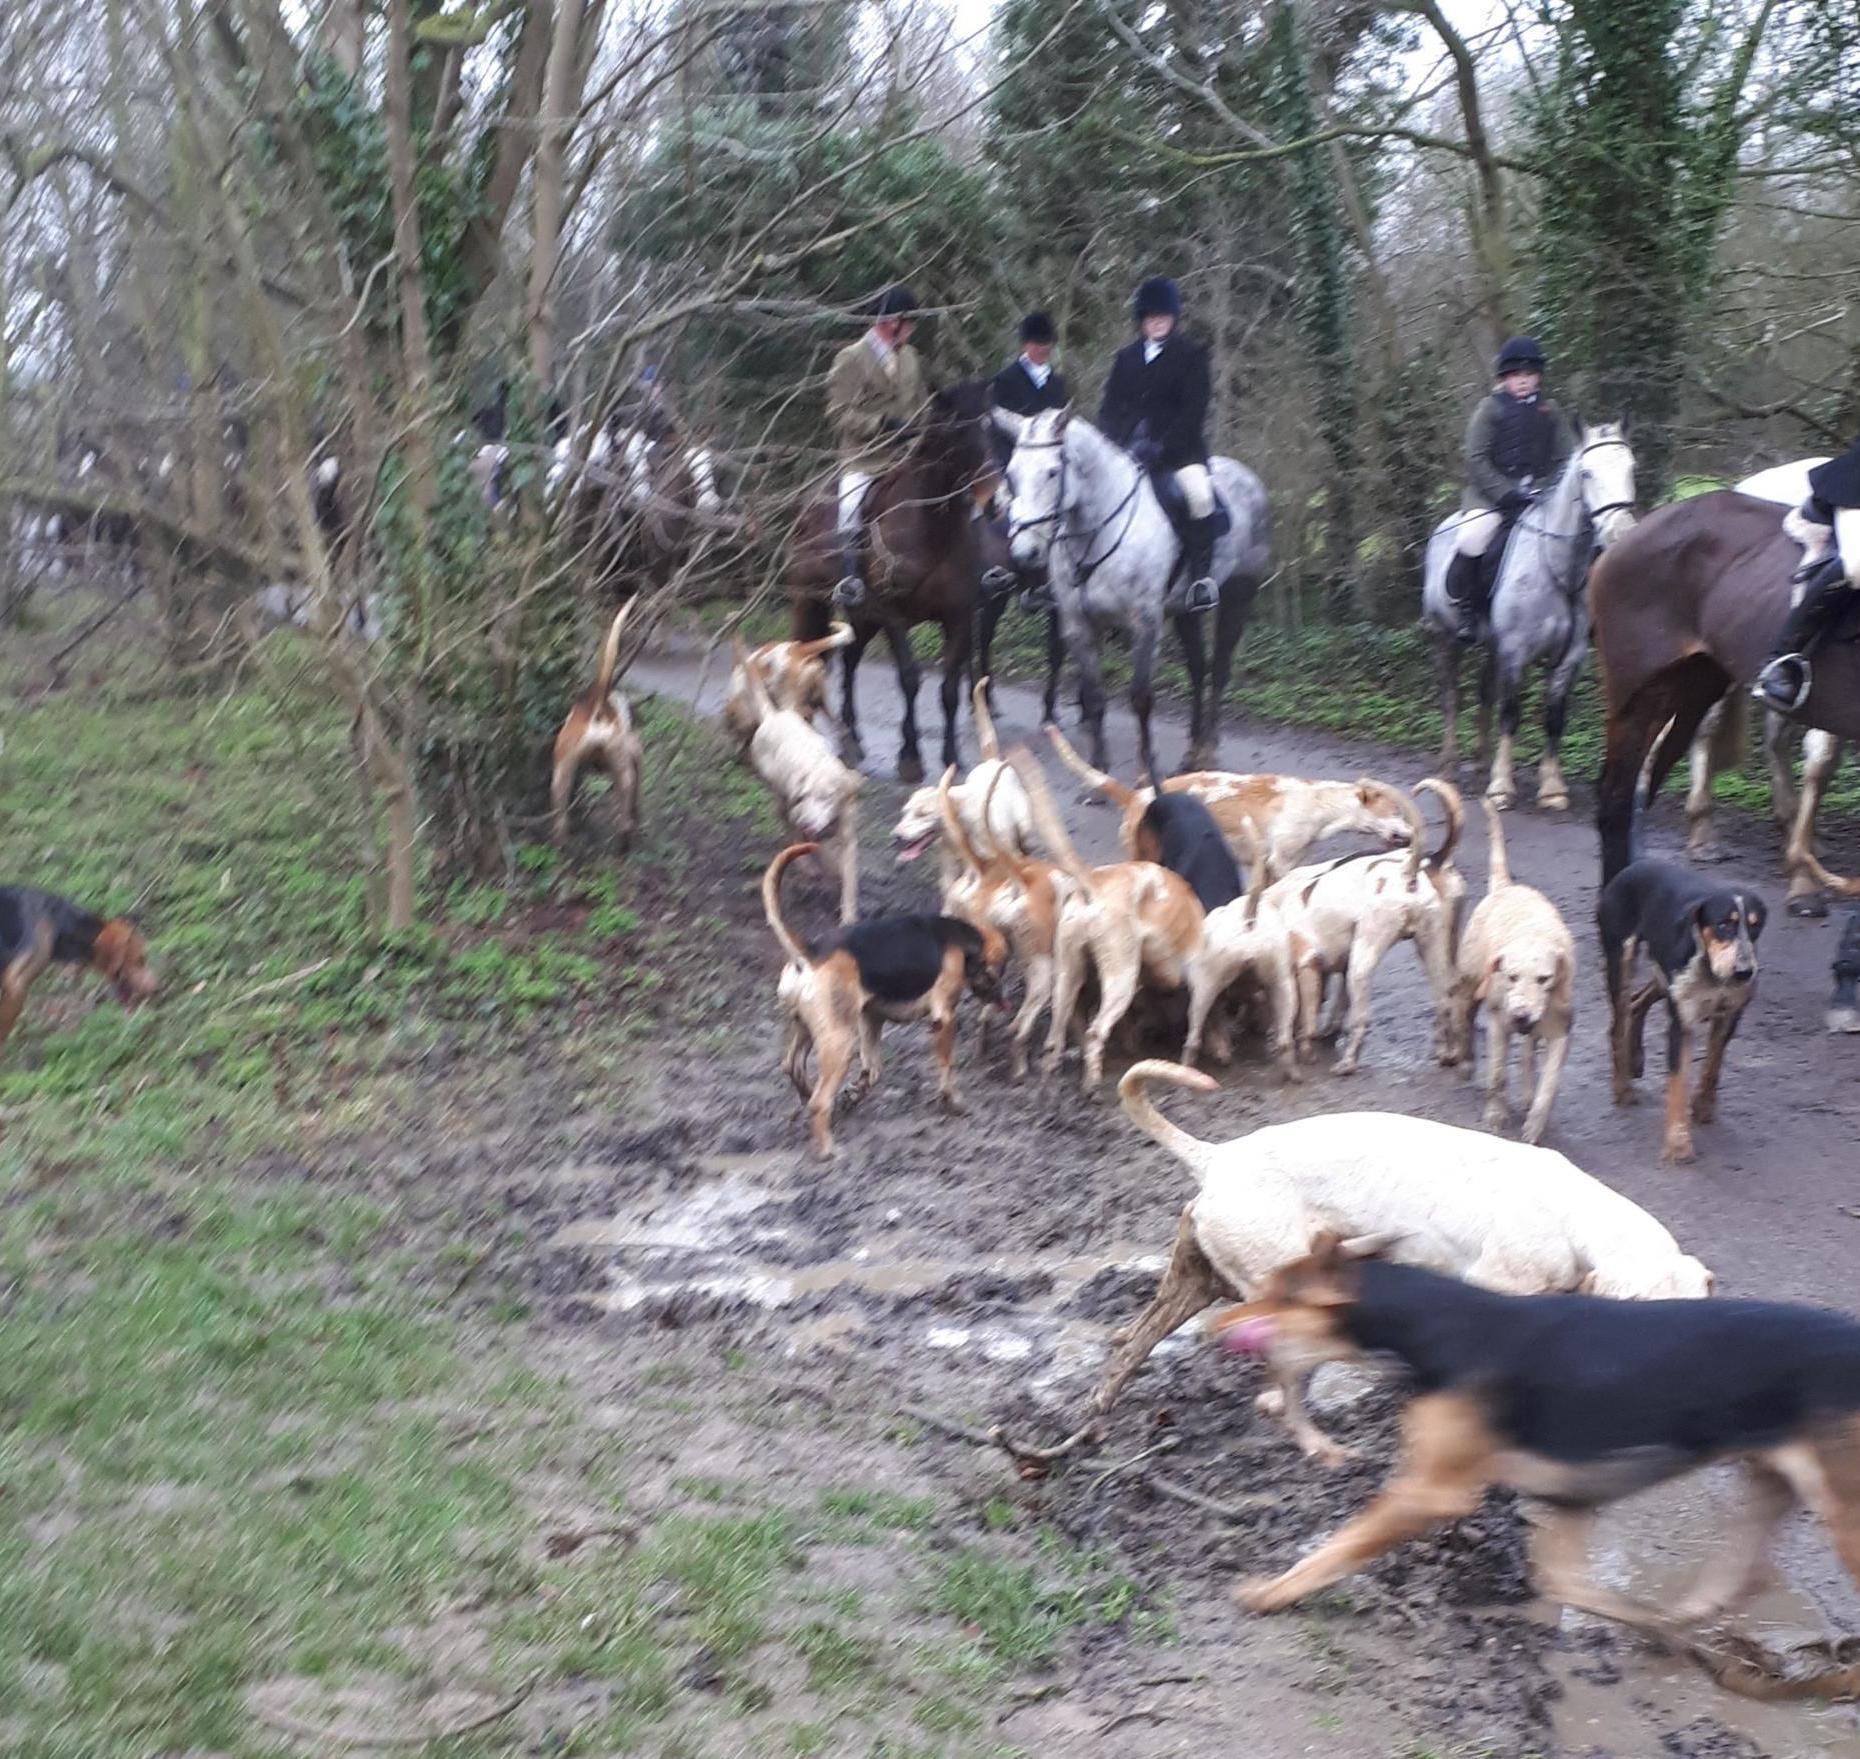 Puckeridge Hunt said the trail its hounds were following “must have drifted” into the farm